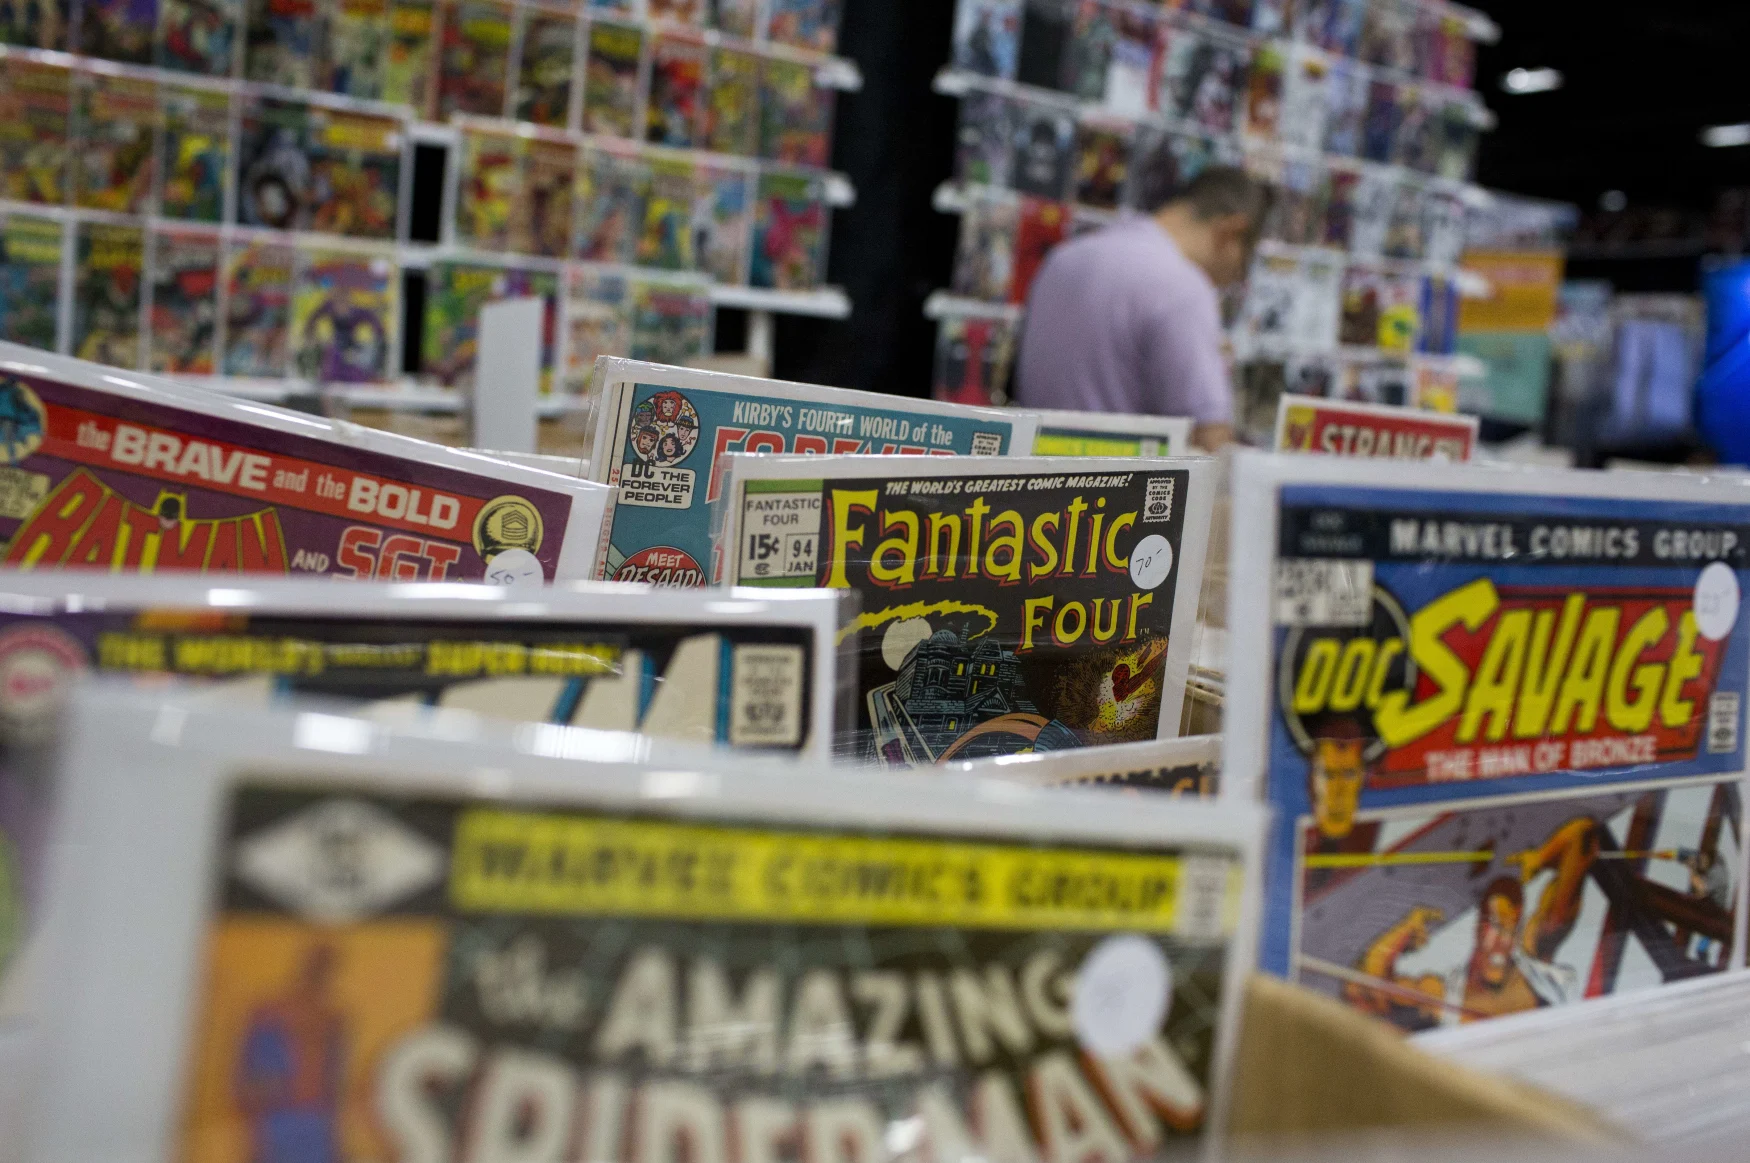 Comic books are displayed at the DC Awesomecon comic book convention in Washington, DC, on May 29, 2015. AFP PHOTO/ ANDREW CABALLERO-REYNOLDS        (Photo credit should read Andrew Caballero-Reynolds/AFP via Getty Images)